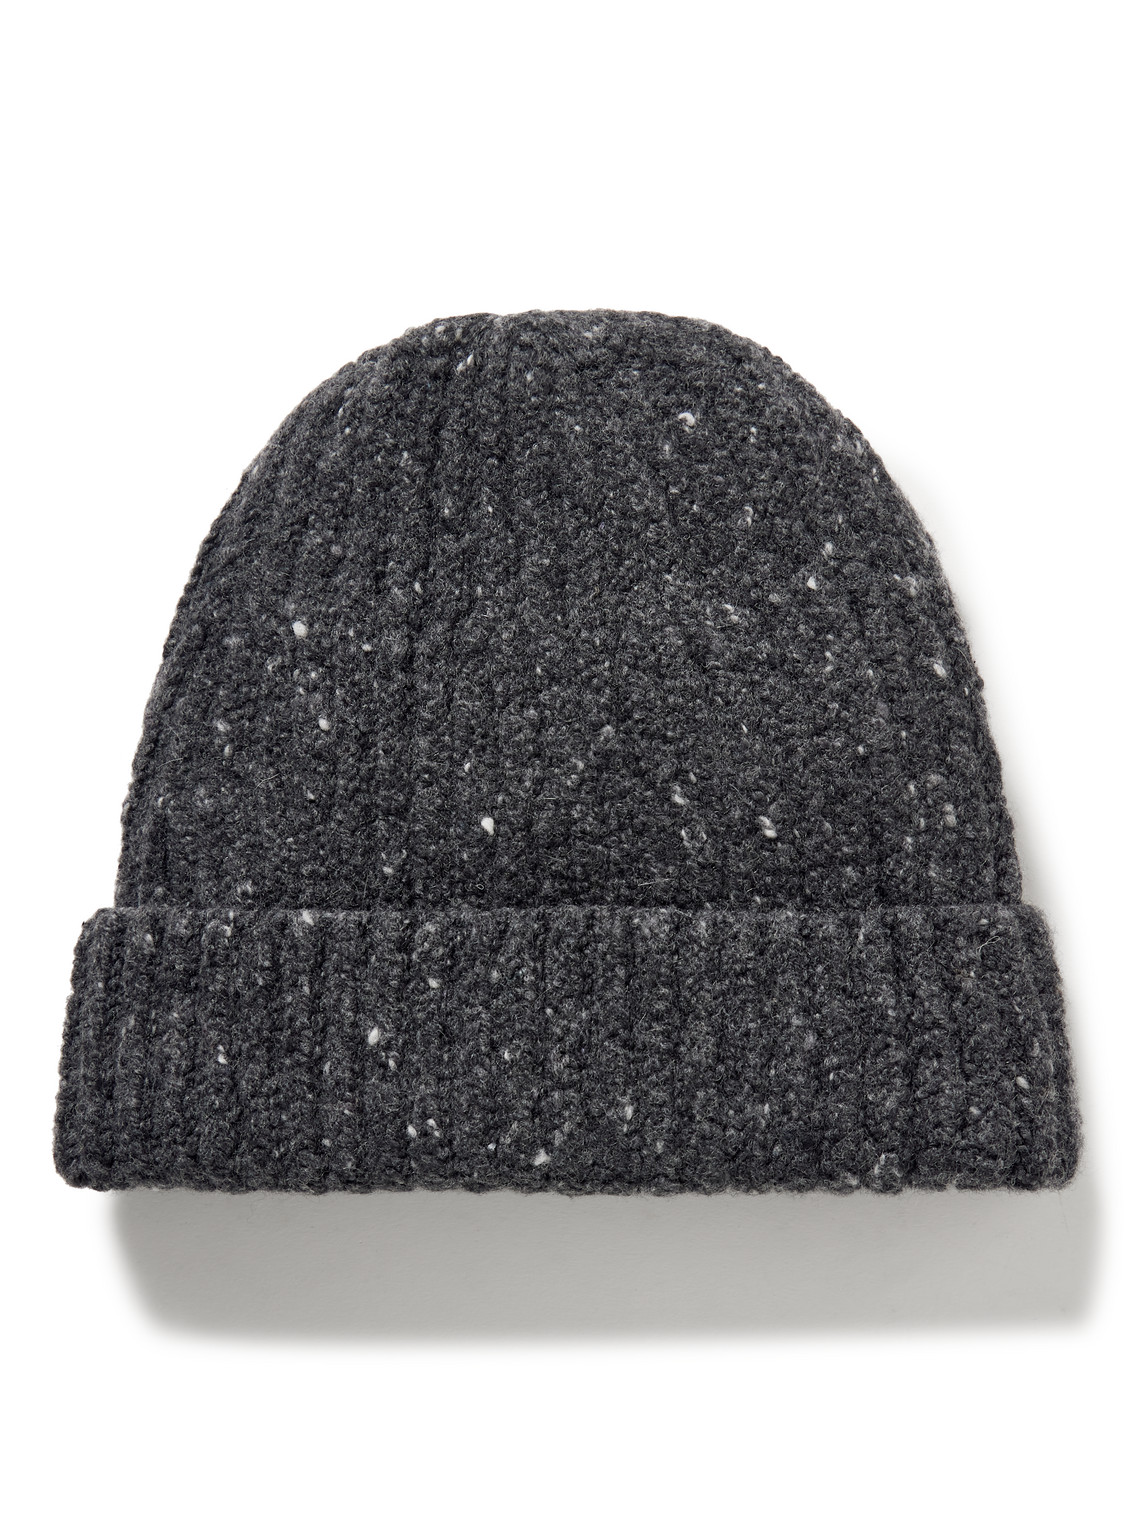 Inis Meáin Ribbed Donegal Merino Wool and Cashmere-Blend Beanie